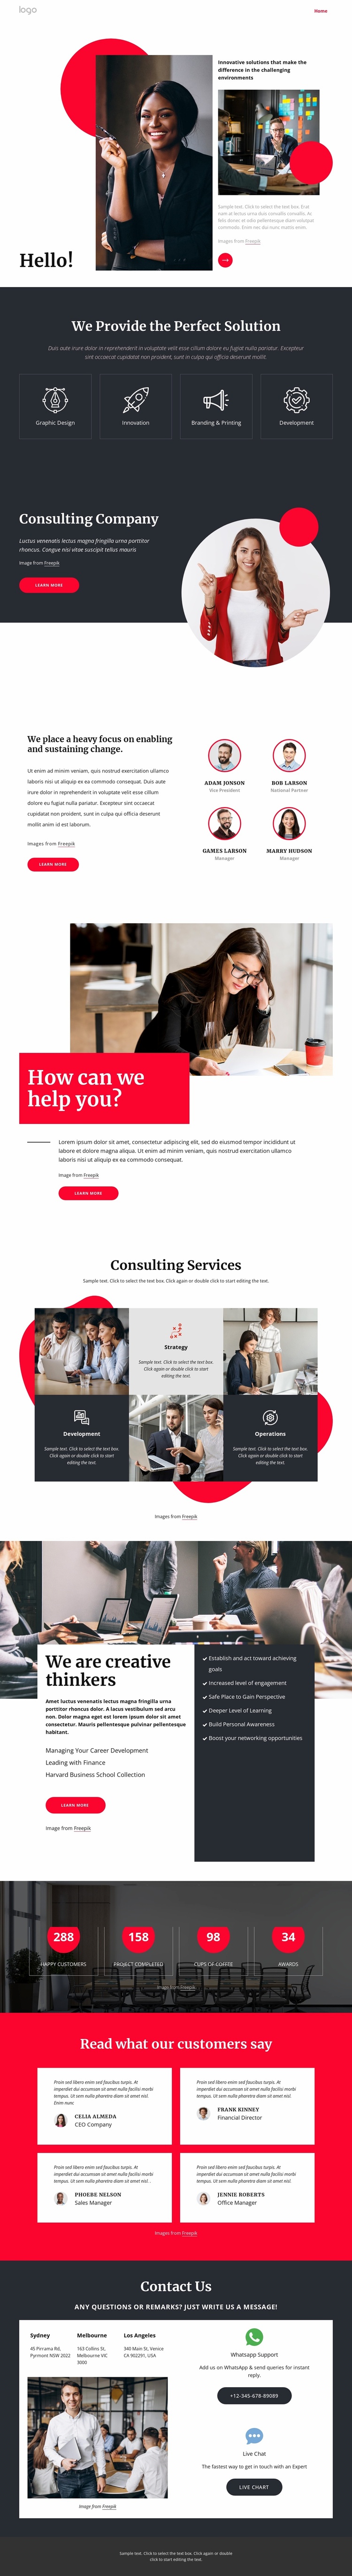 Consulting company NYC eCommerce Template